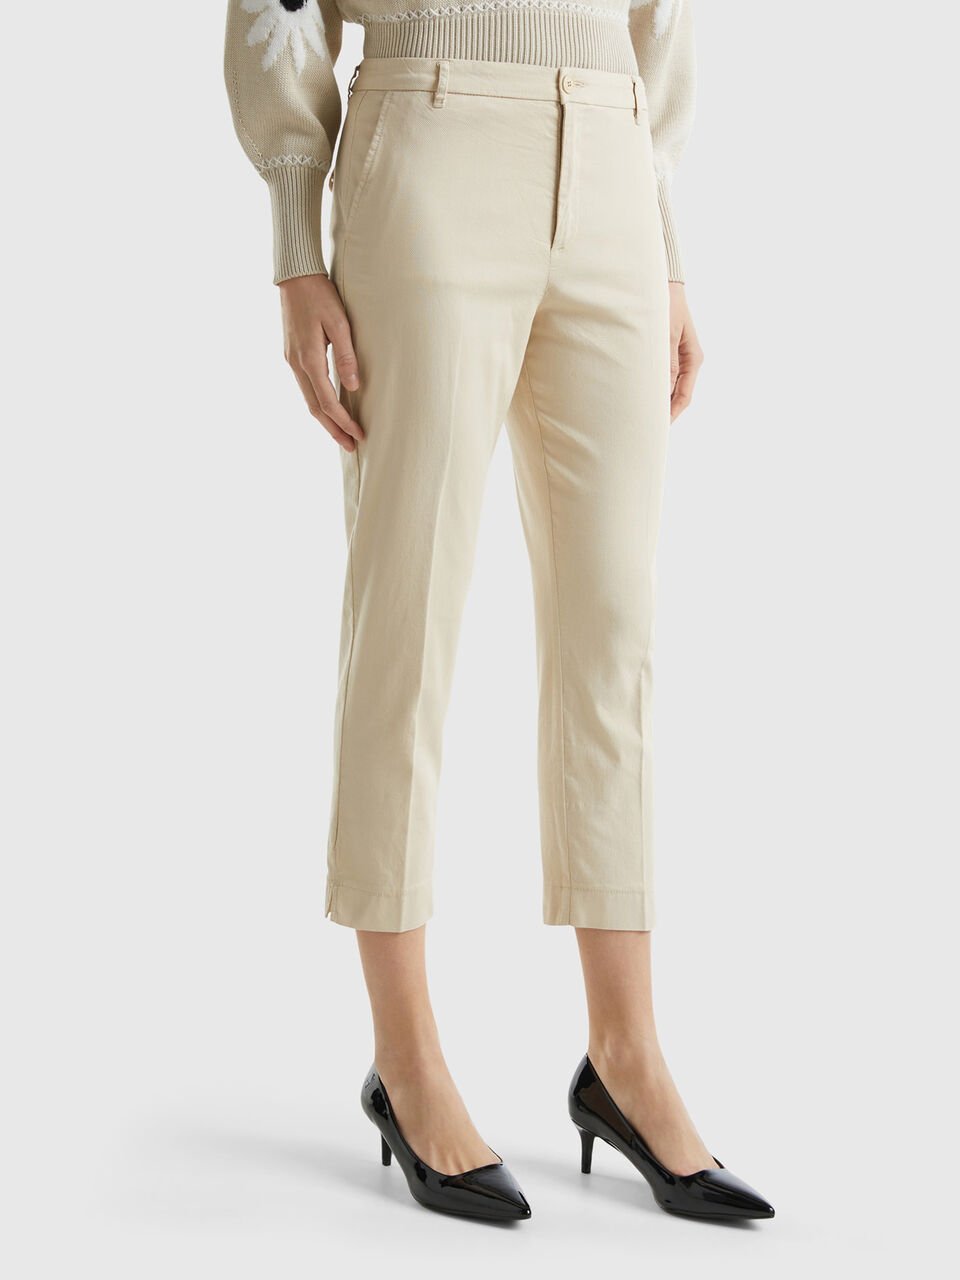 Women's Cropped Trousers  Chino Crops - Cotton Traders